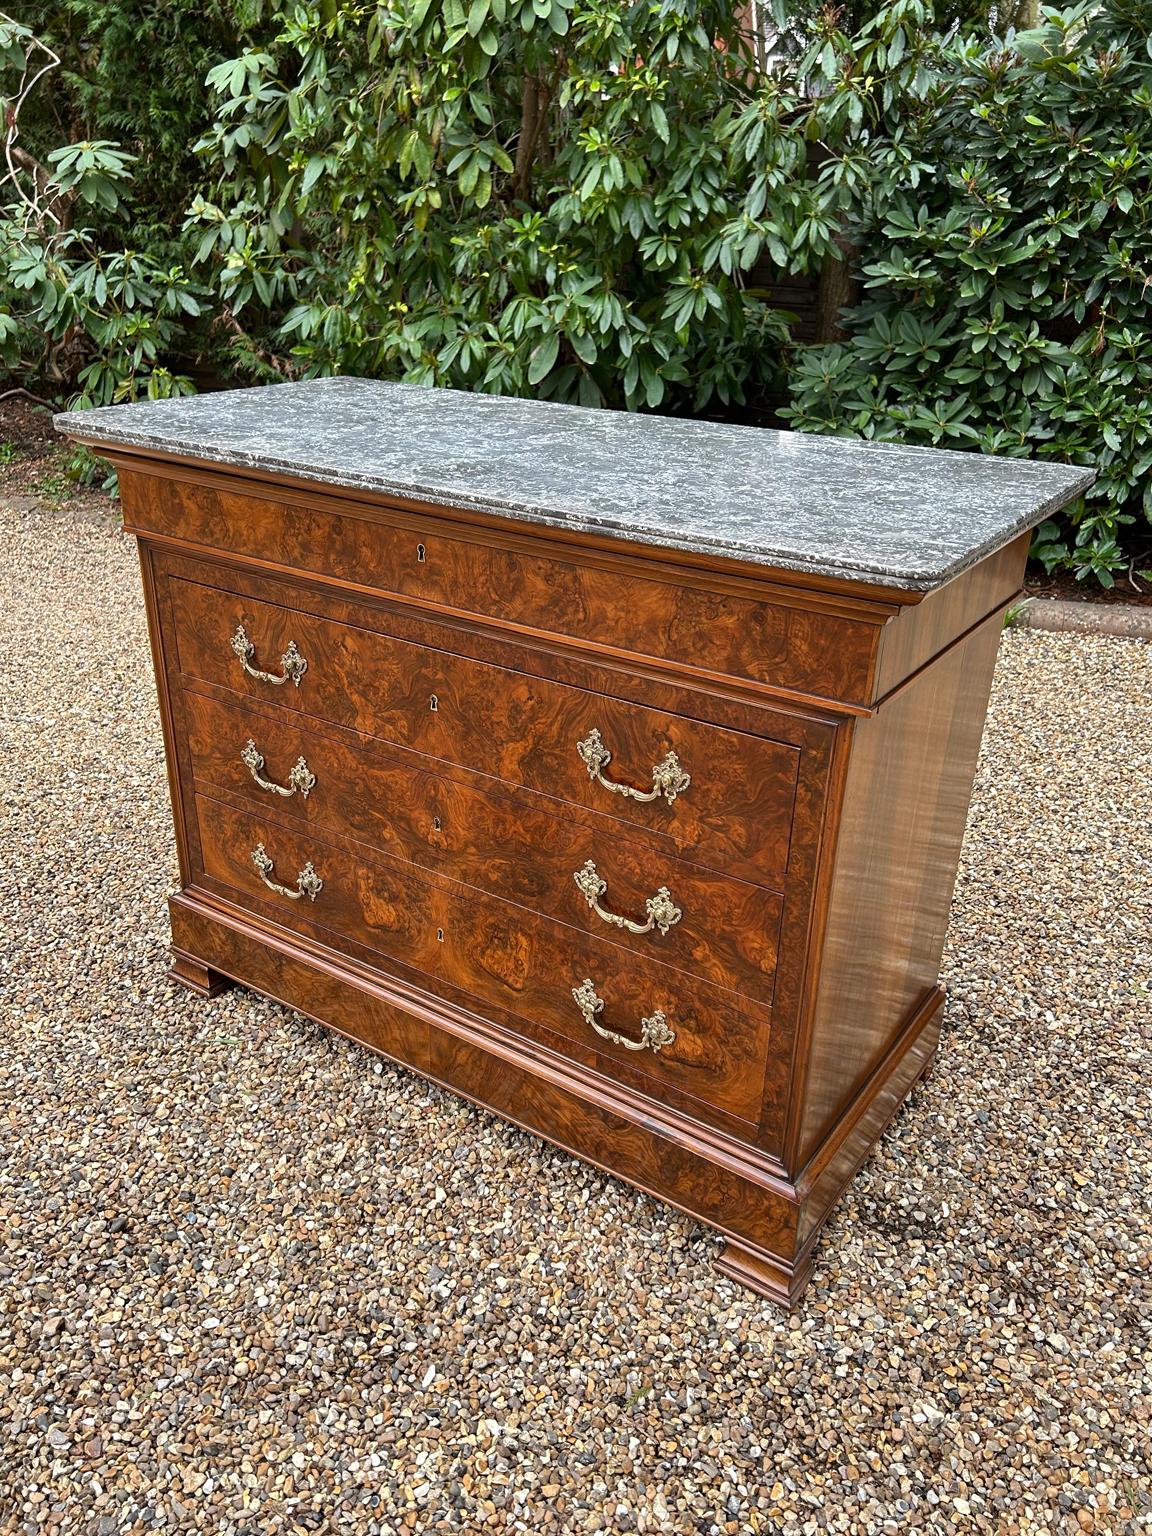 Victorian 19th Century French Burr Walnut Commode / Chest of Drawers with Marble Top